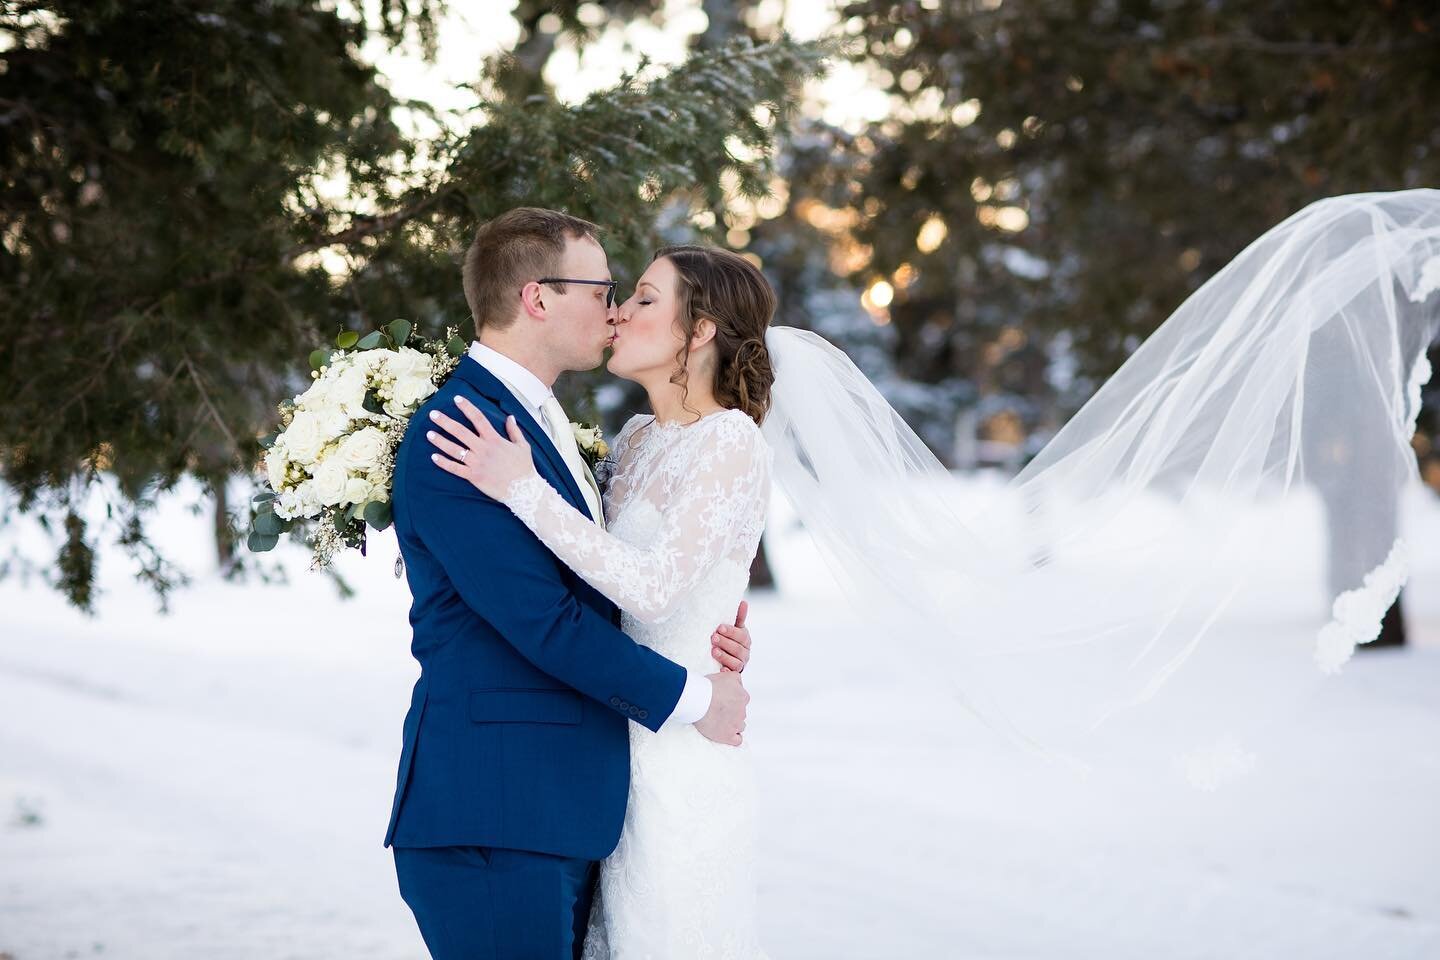 I&rsquo;ve been editing this winter wonderland of a wedding this week, and it has me missing snow! Do you think we&rsquo;ll get more snow this year? I hope so. ❄️ #winterwedding #nwdbestphoto2022 #bluesuit #omahaweddingphotographer #nebraskaweddingph